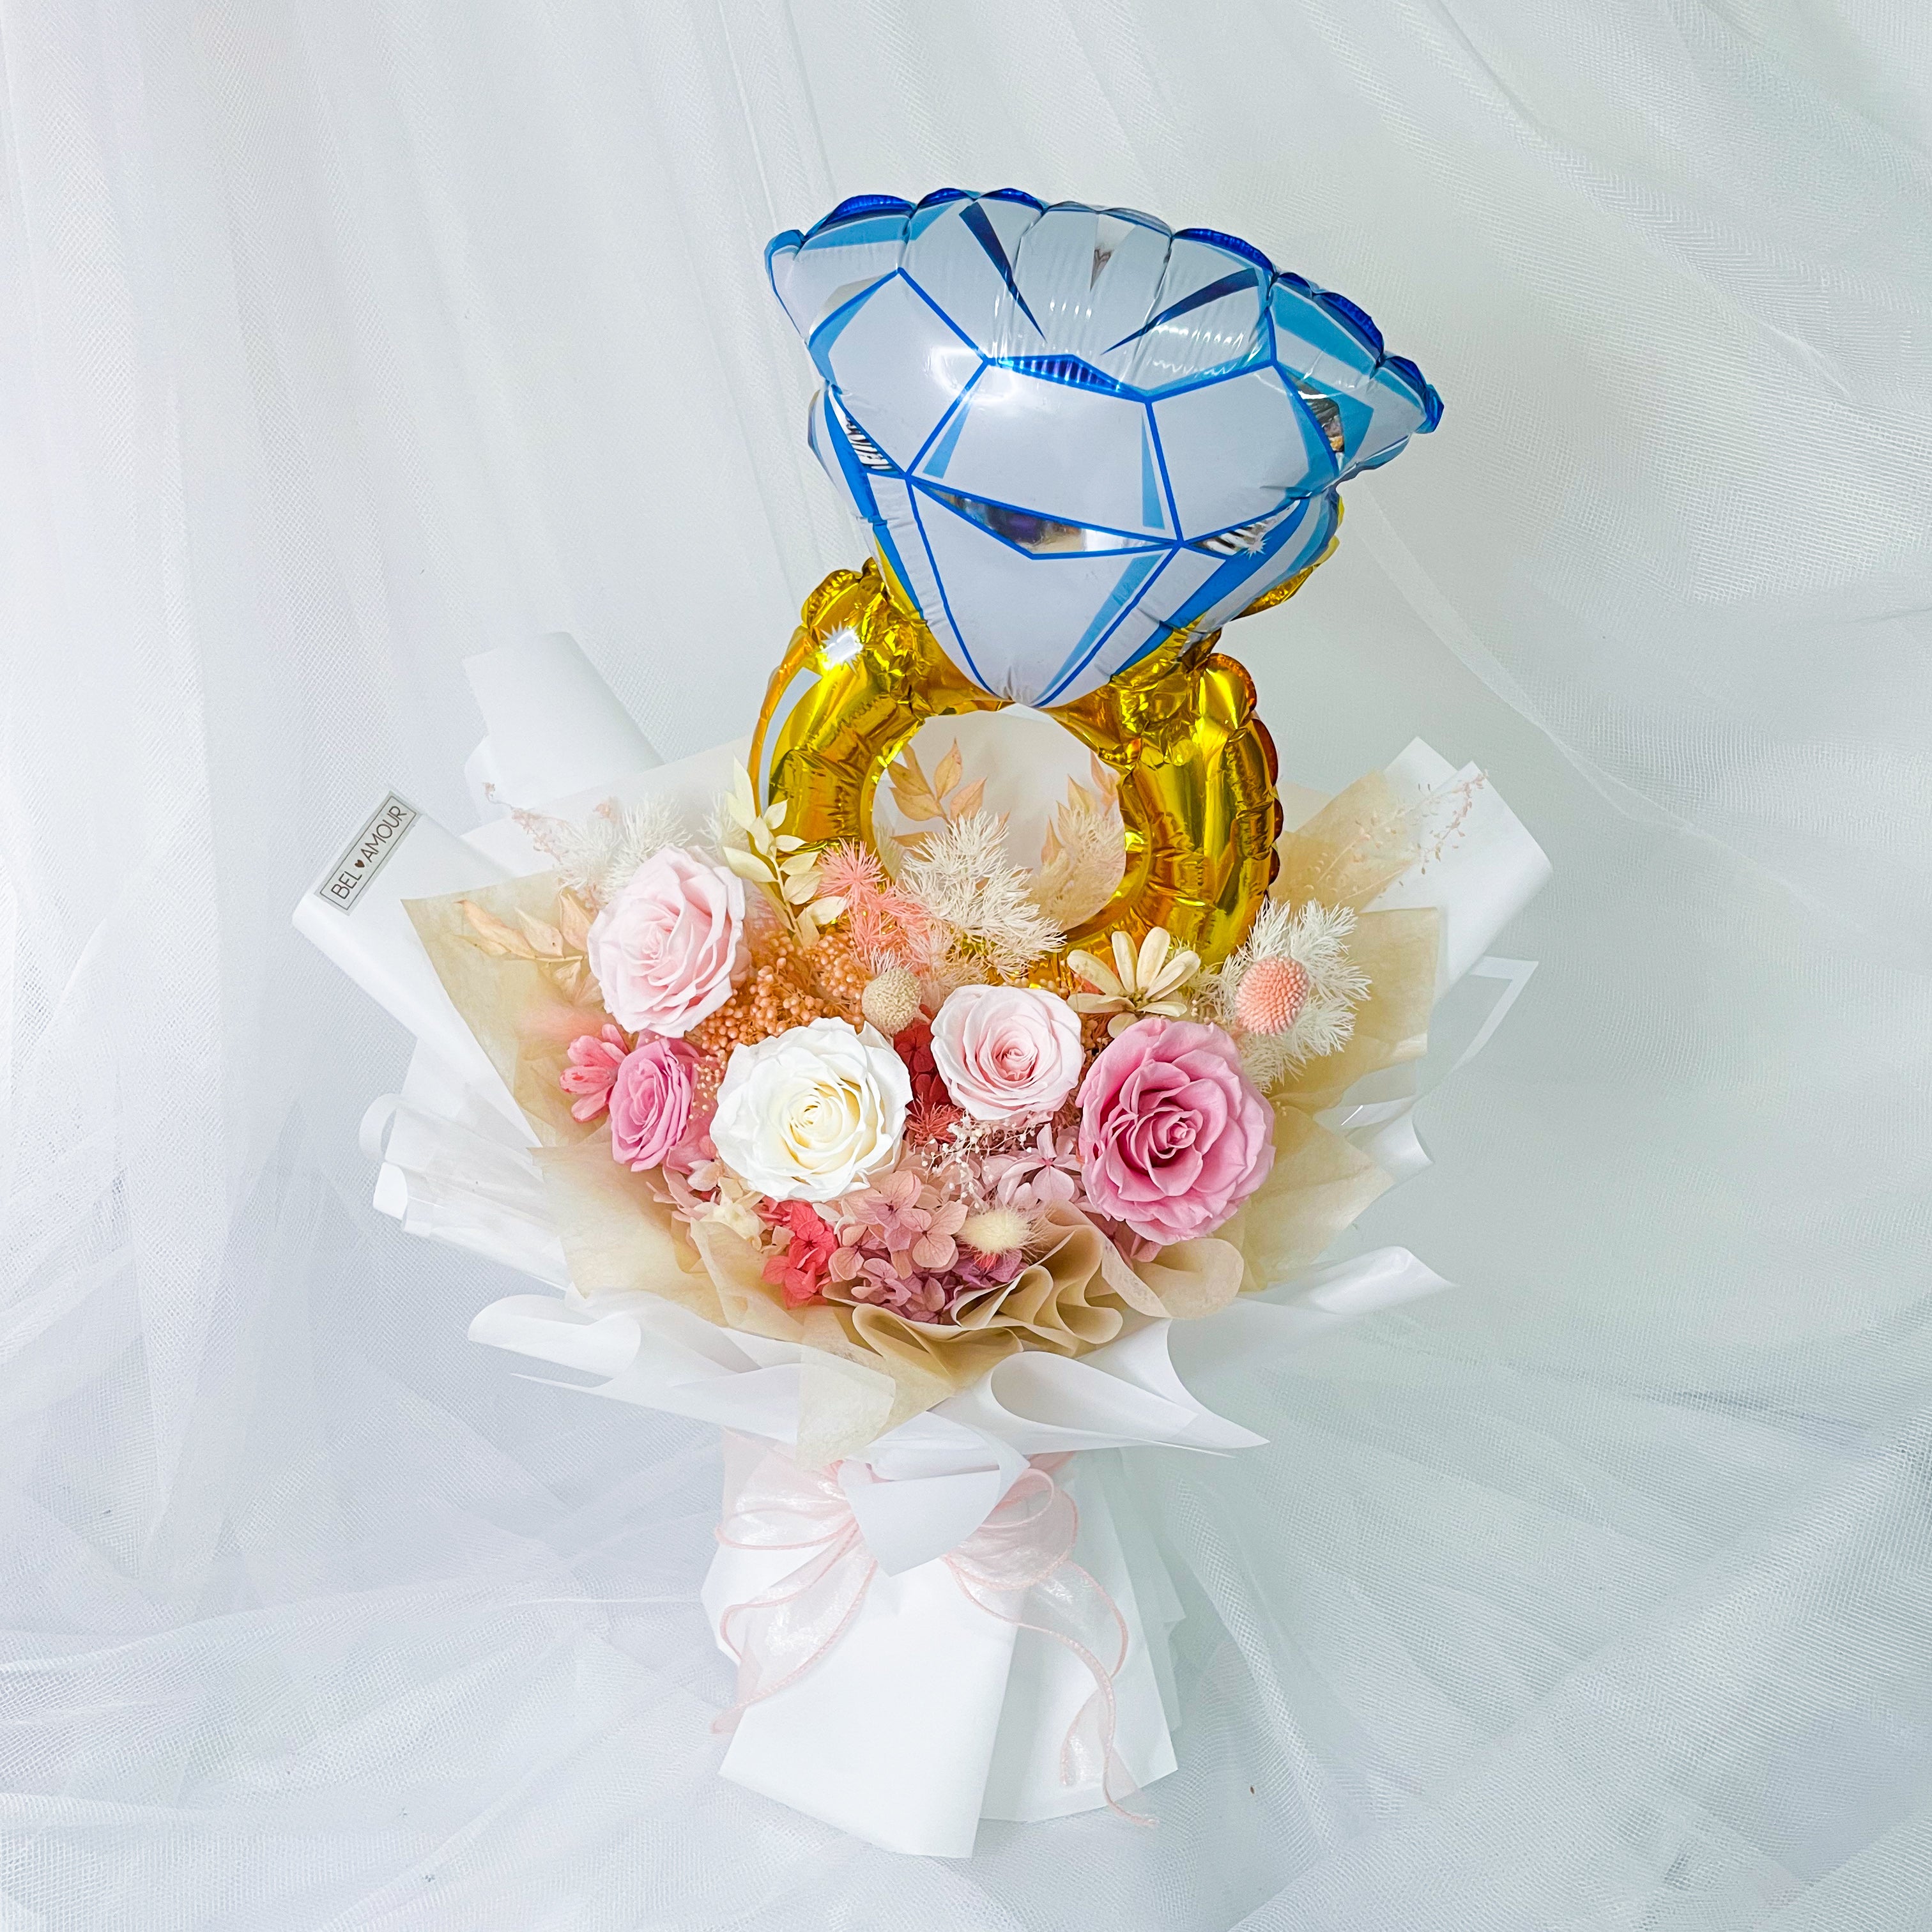 Preserved Flower Bouquet - 5 Roses w/ Diamond Ring Foil Balloon